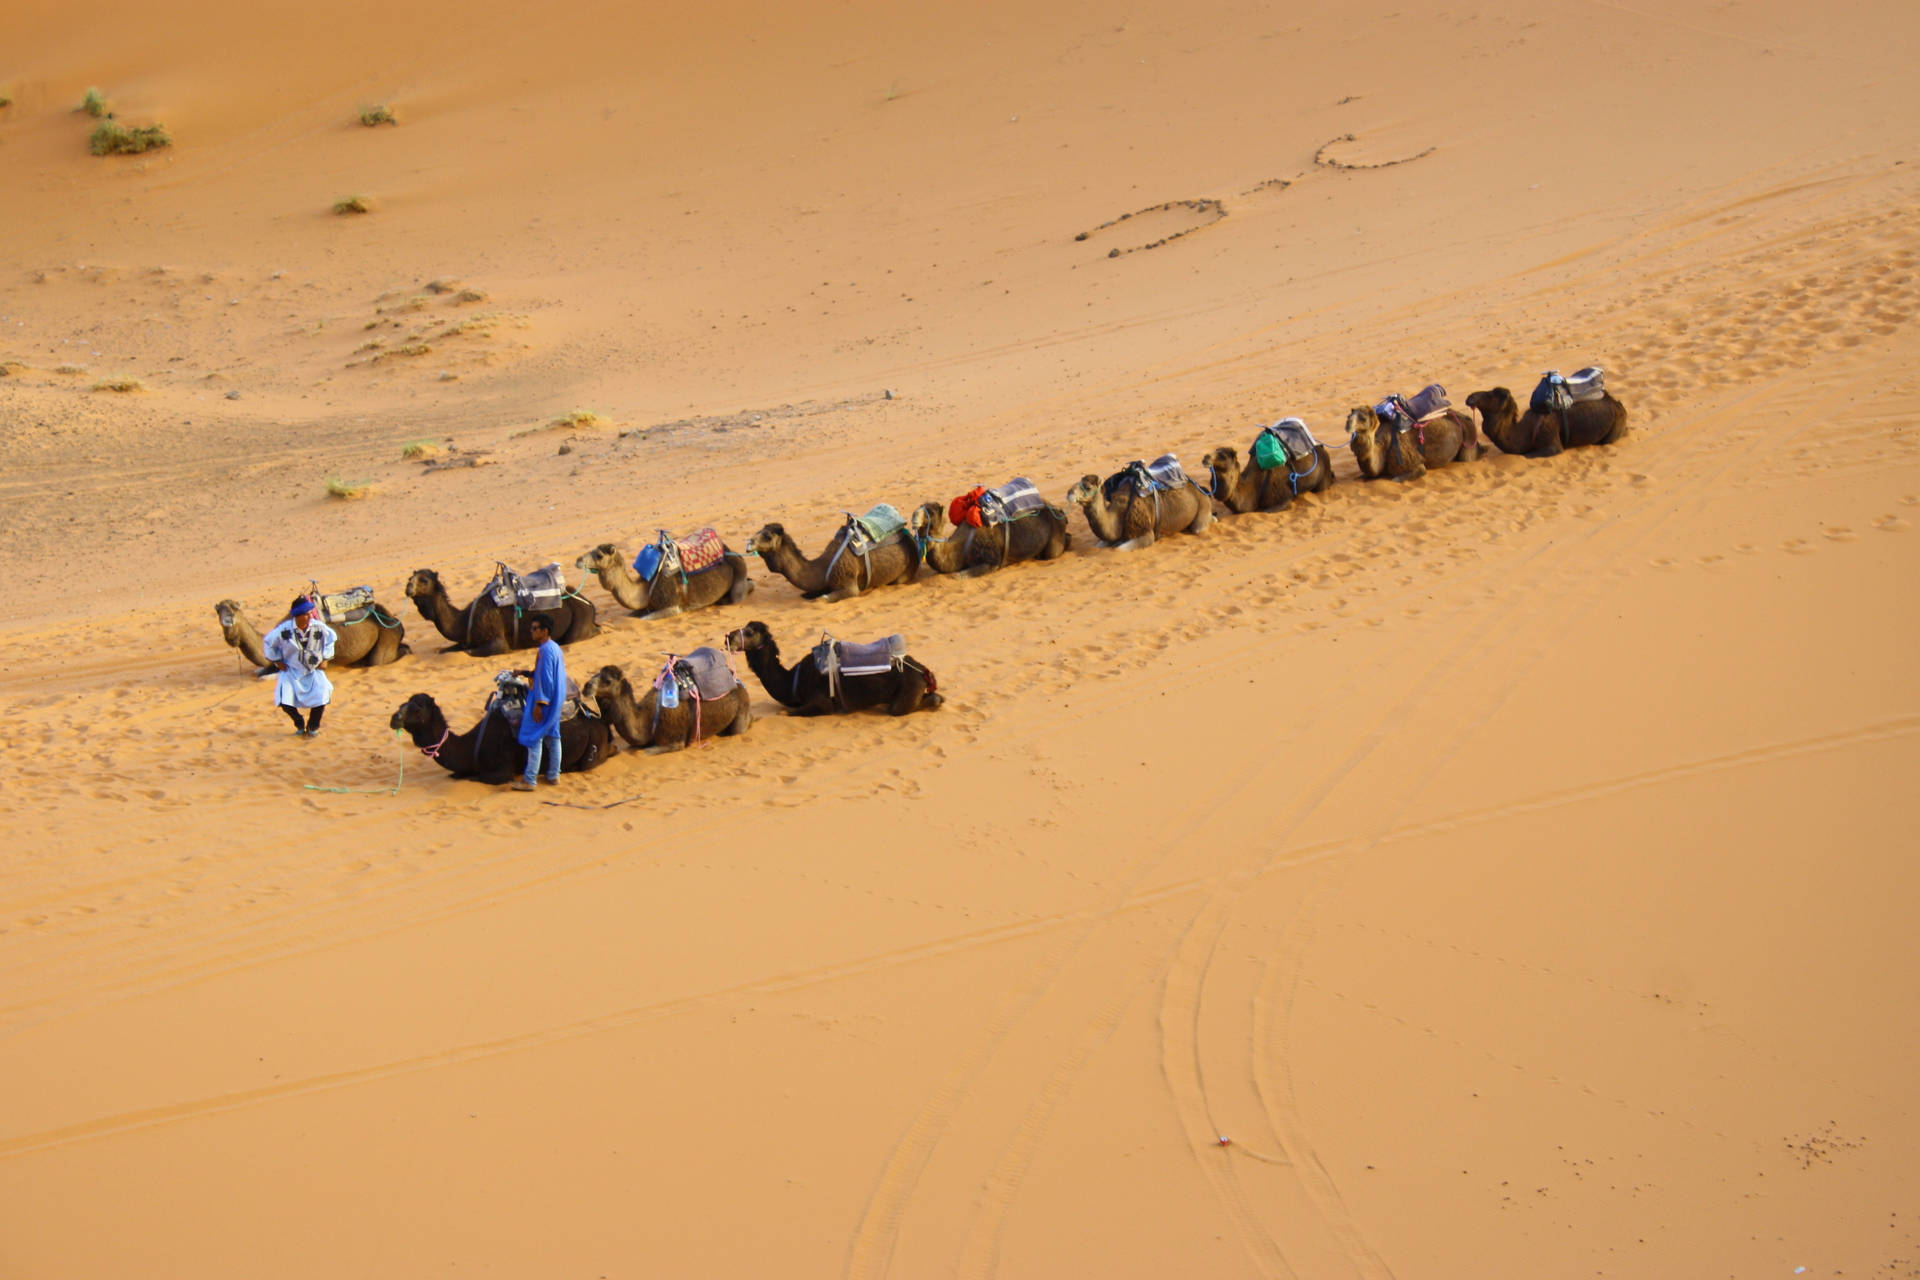 Resting Camels In The Sahara